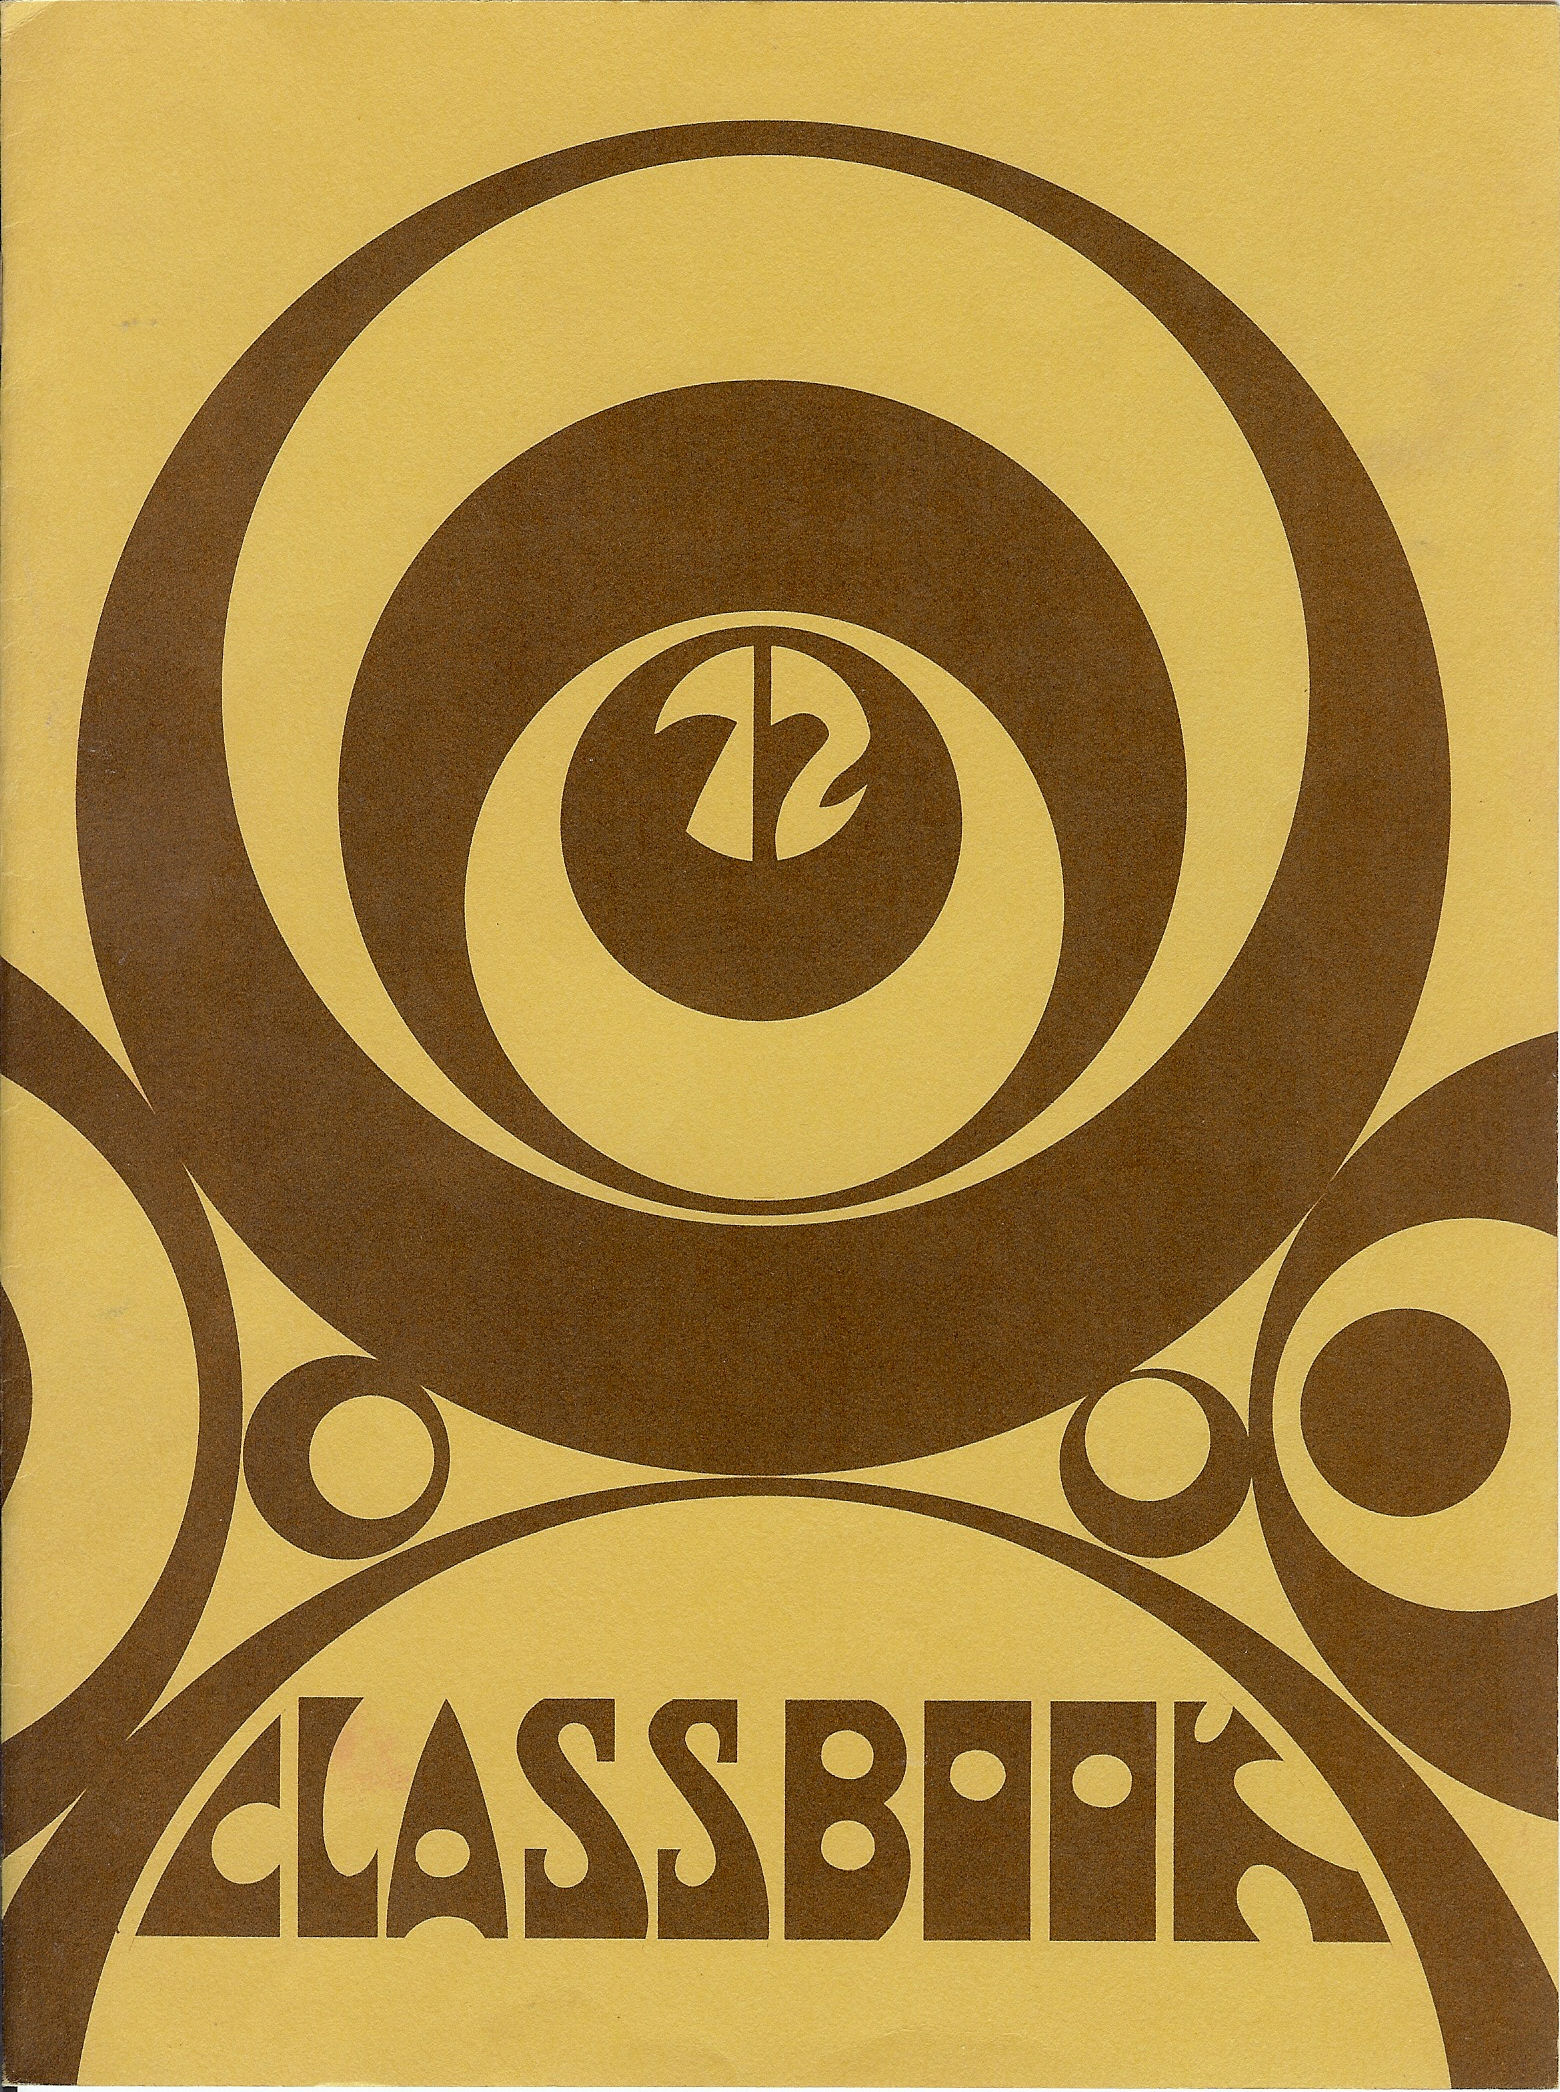 71-72 Yearbook Cover